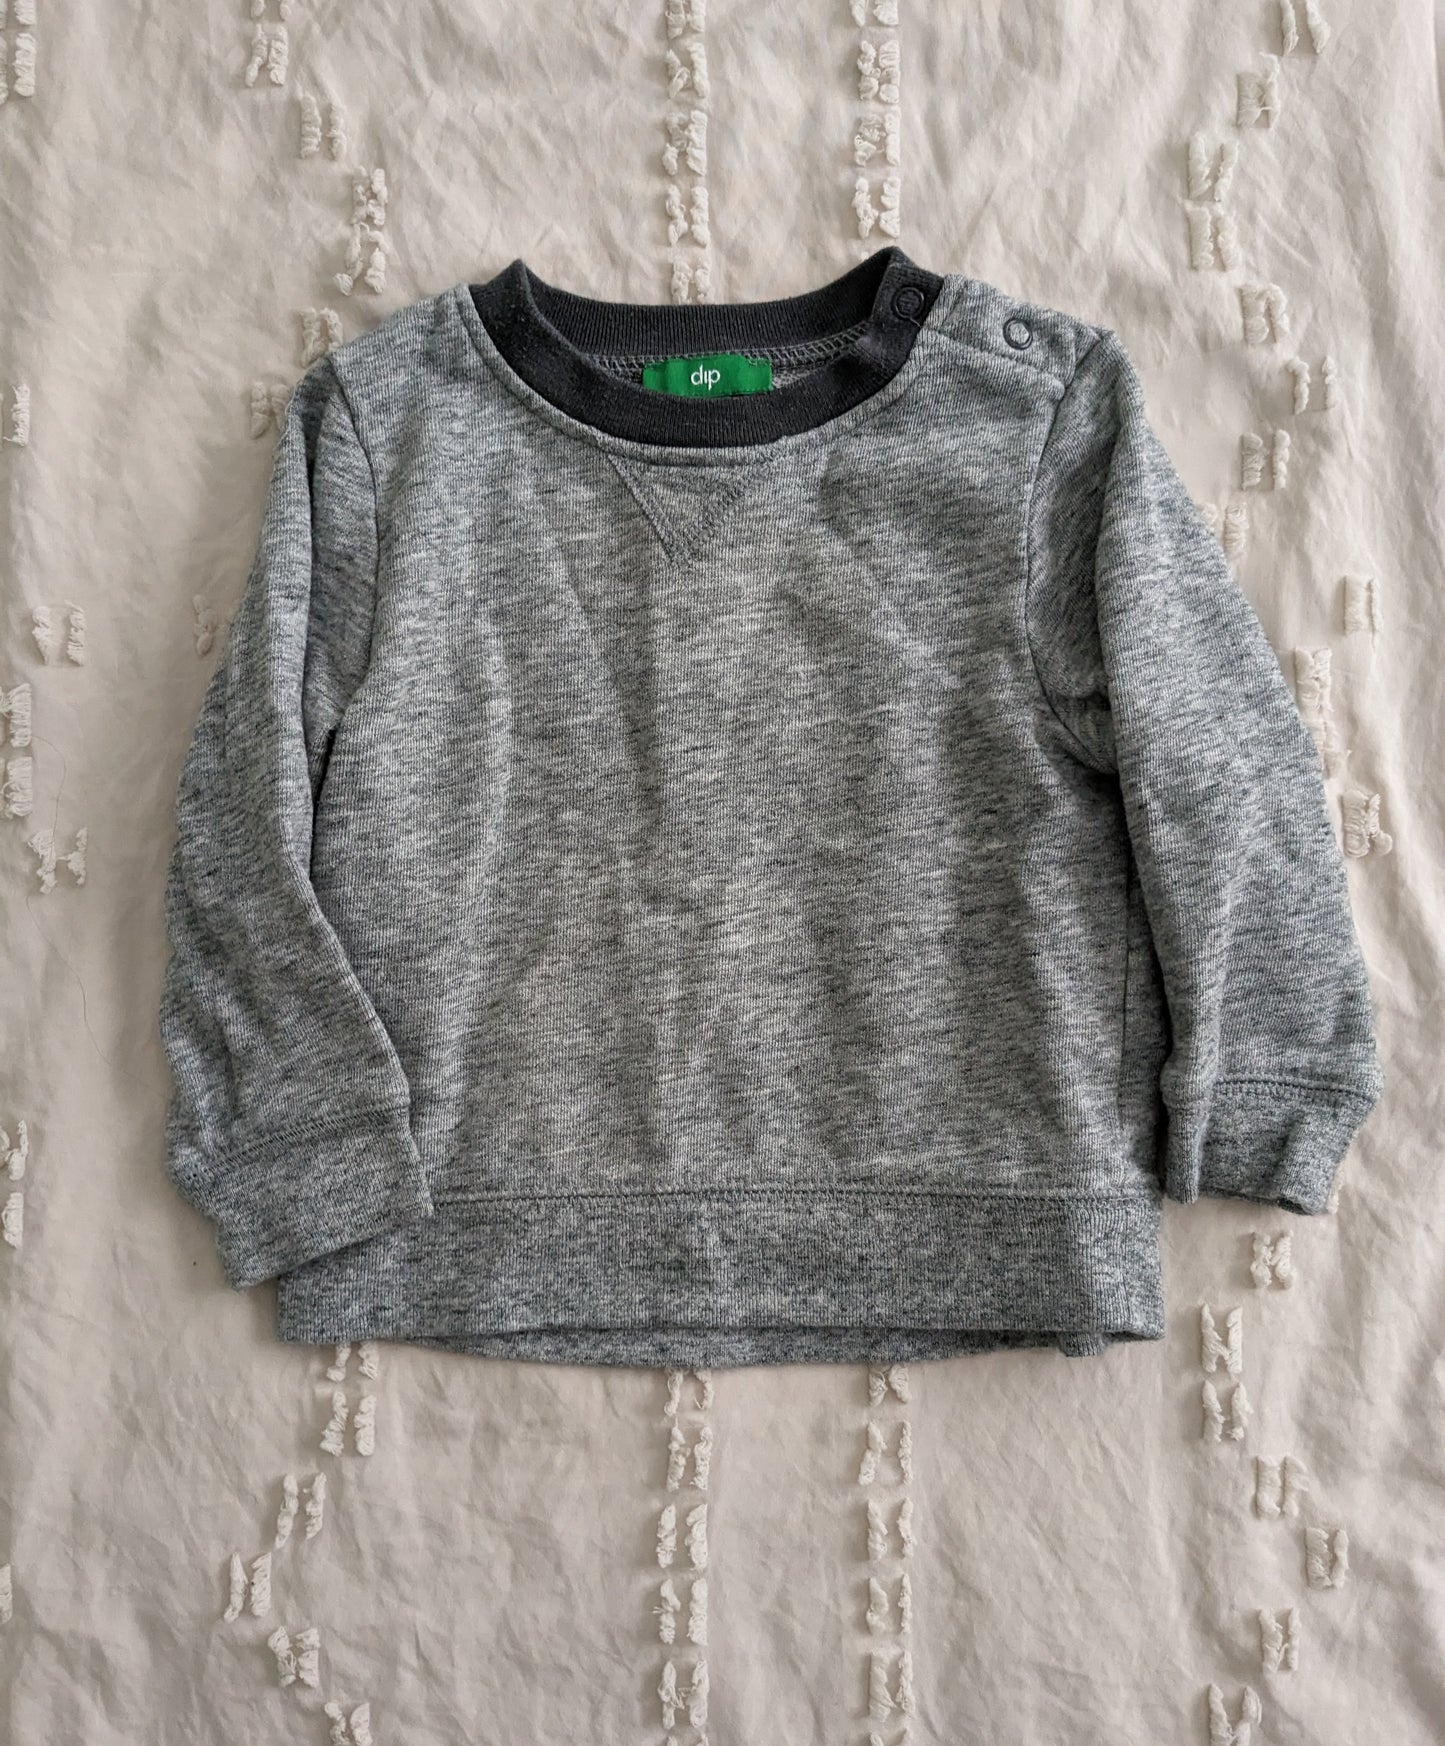 Dip grey pullover | 12-18 month